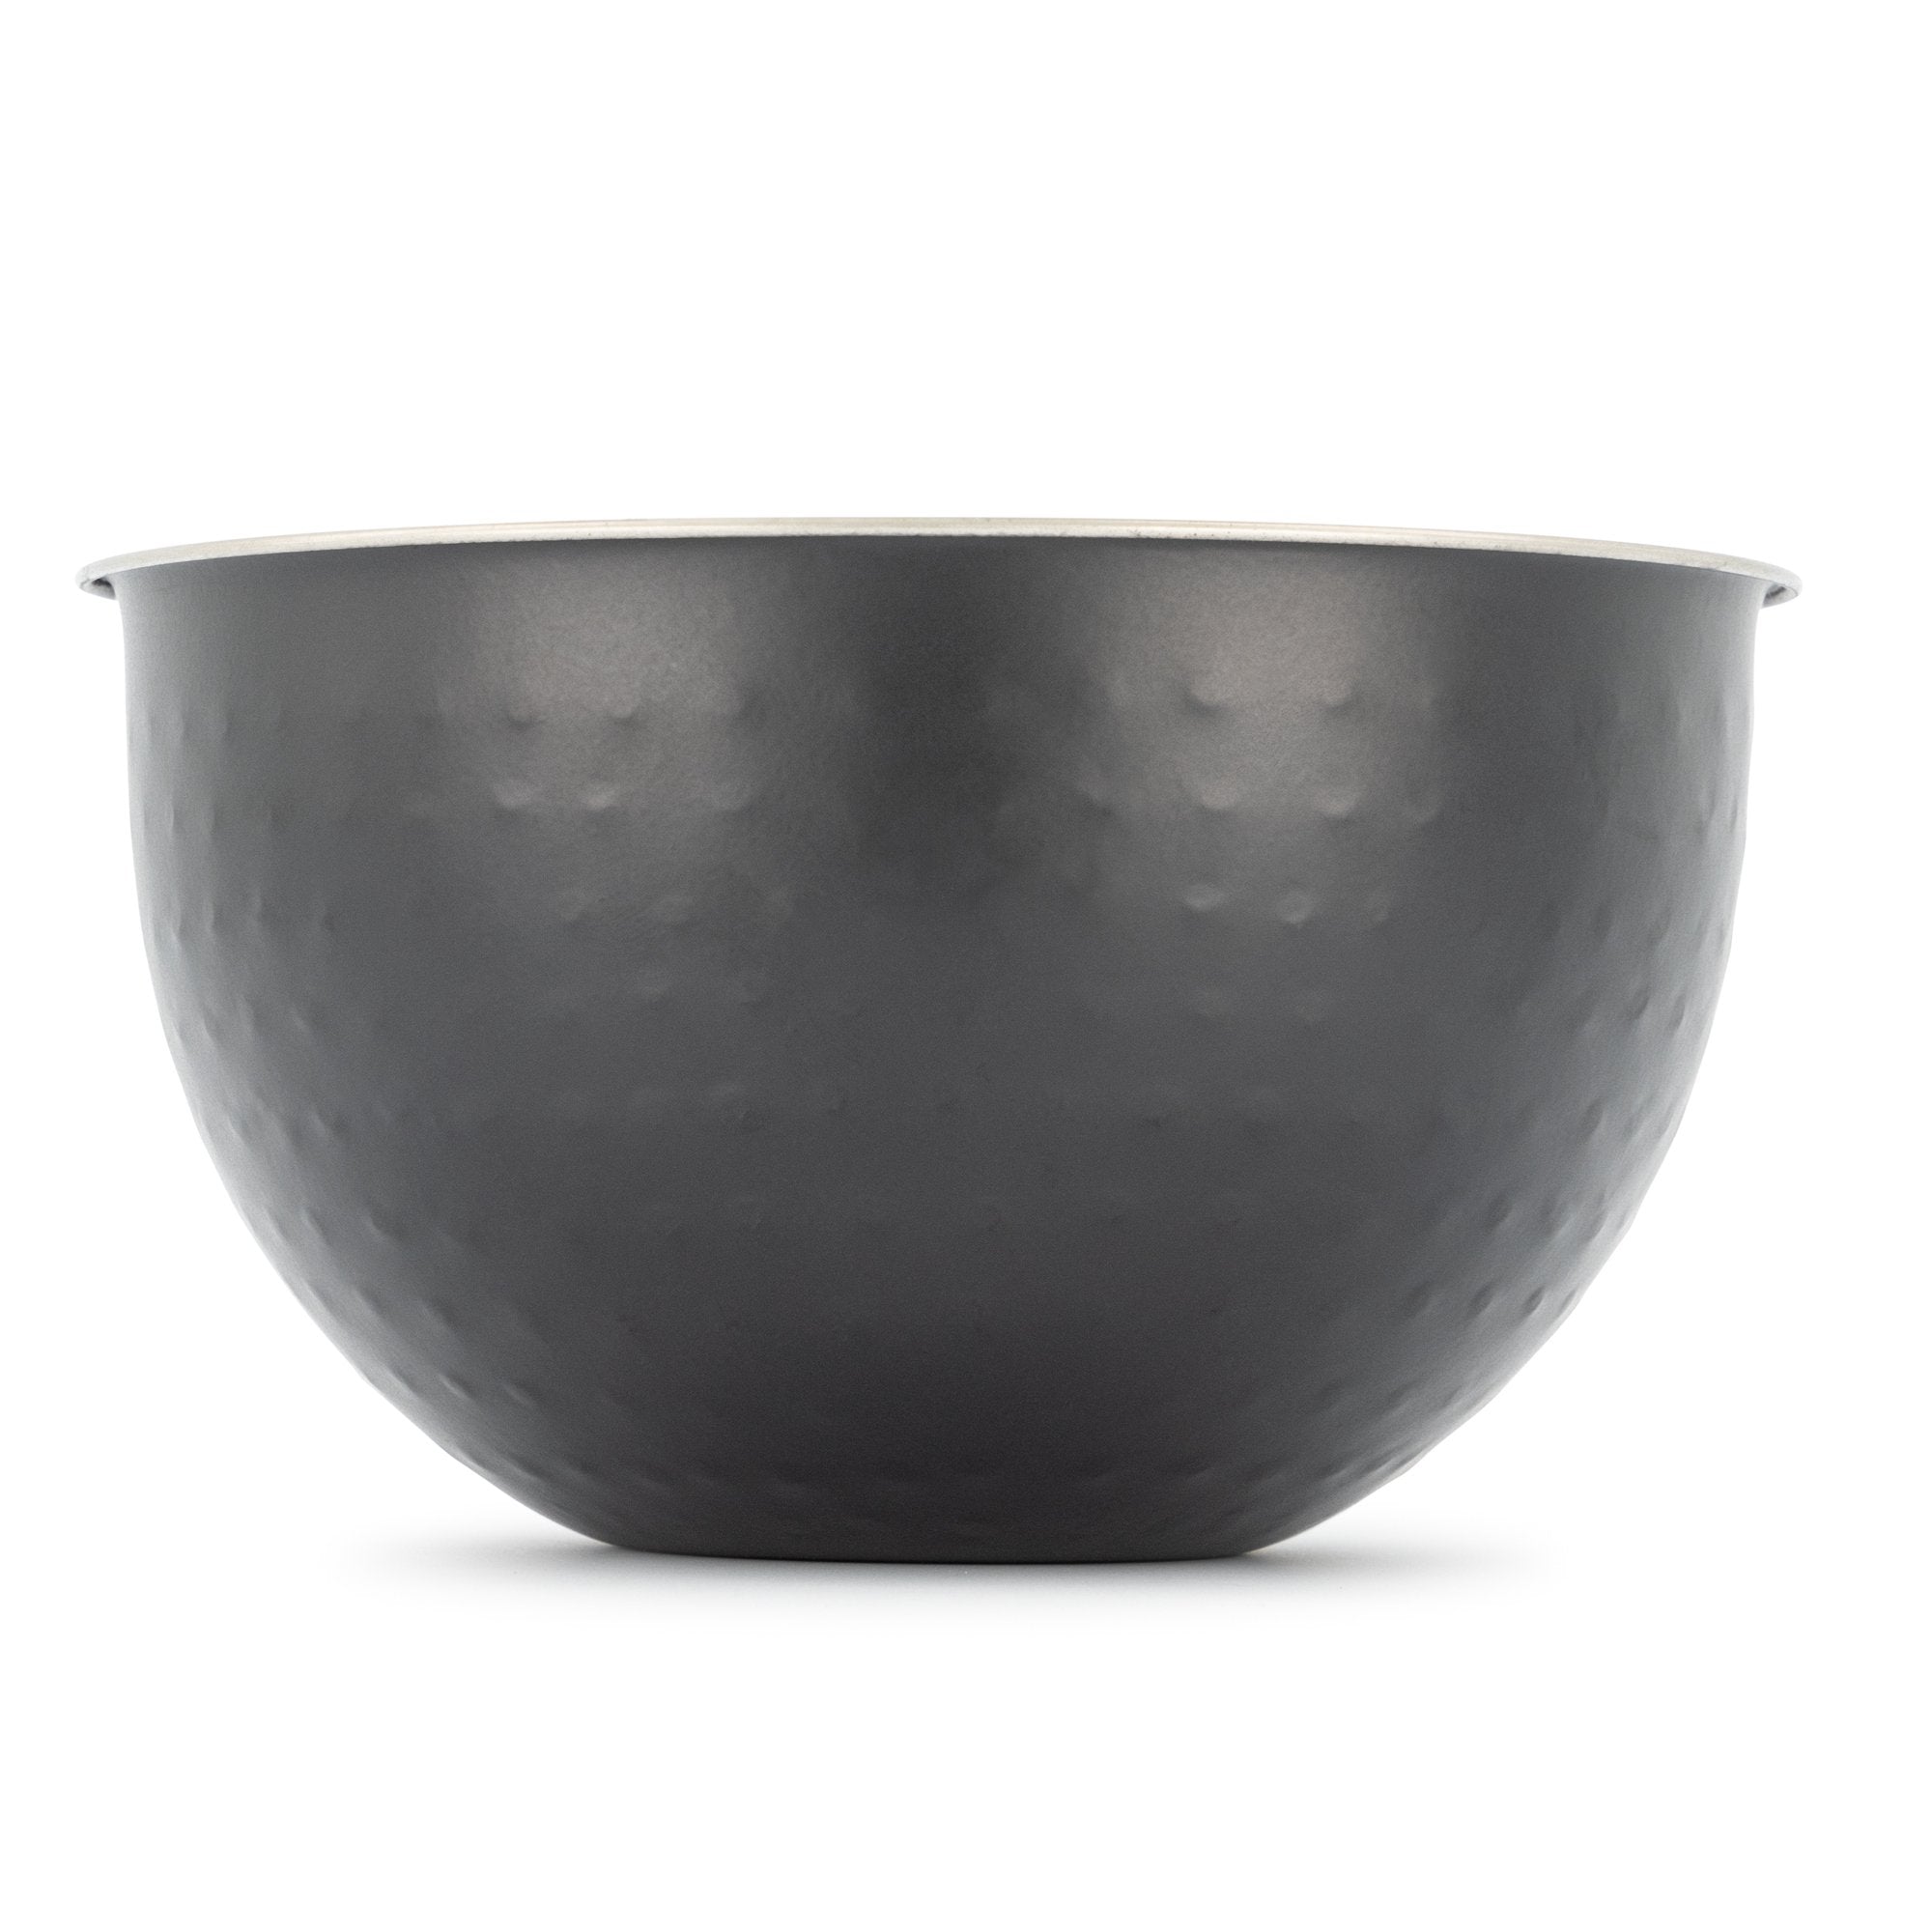 Black and Copper Serving Bowl - 15cm - only5pounds.com